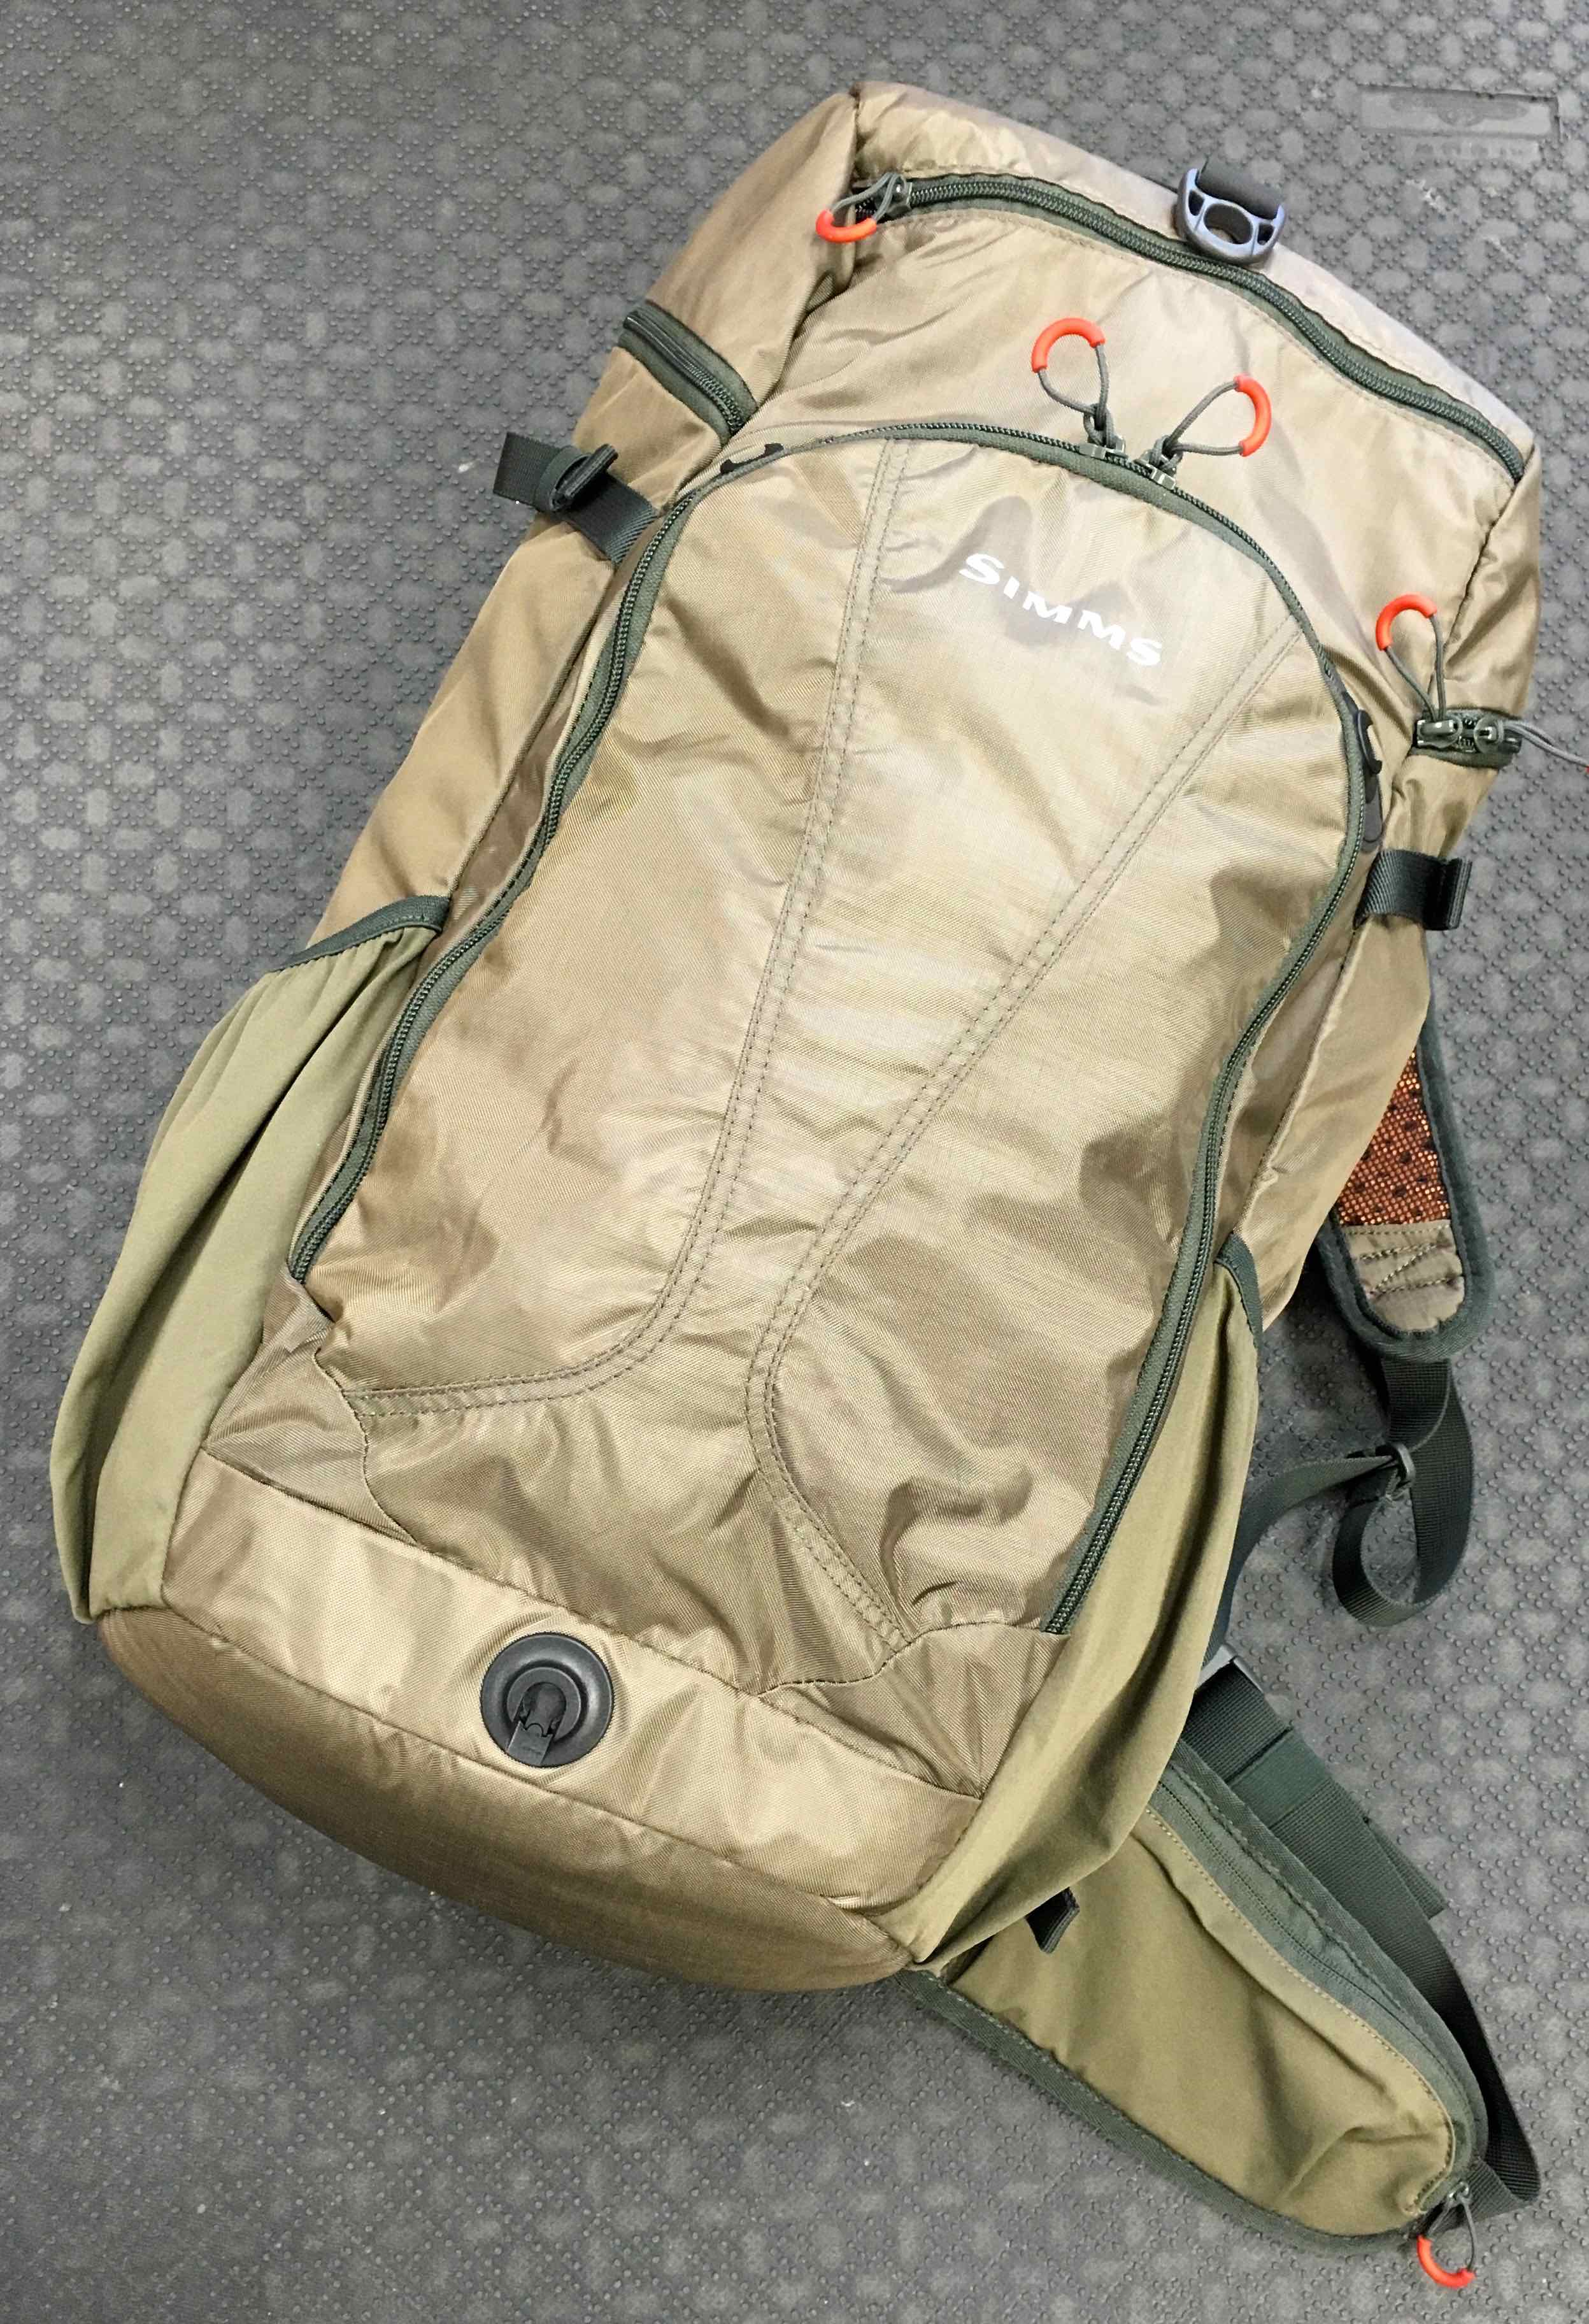 NEW PRICE! – Orvis Safe Passage Tri Pack Chest Backpack – GREAT